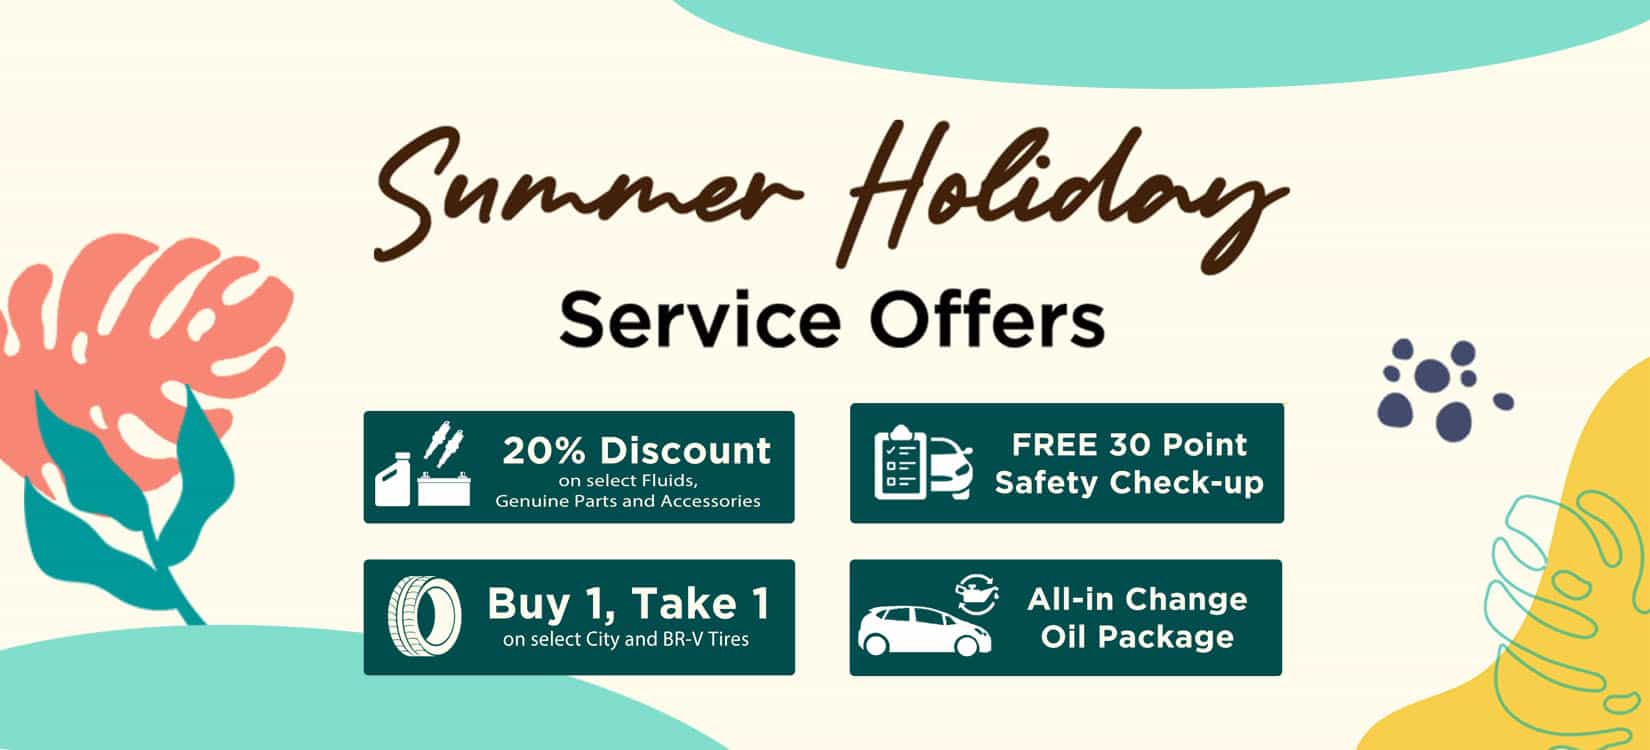 Honda rolls out great deals under Summer Holiday Service Offers